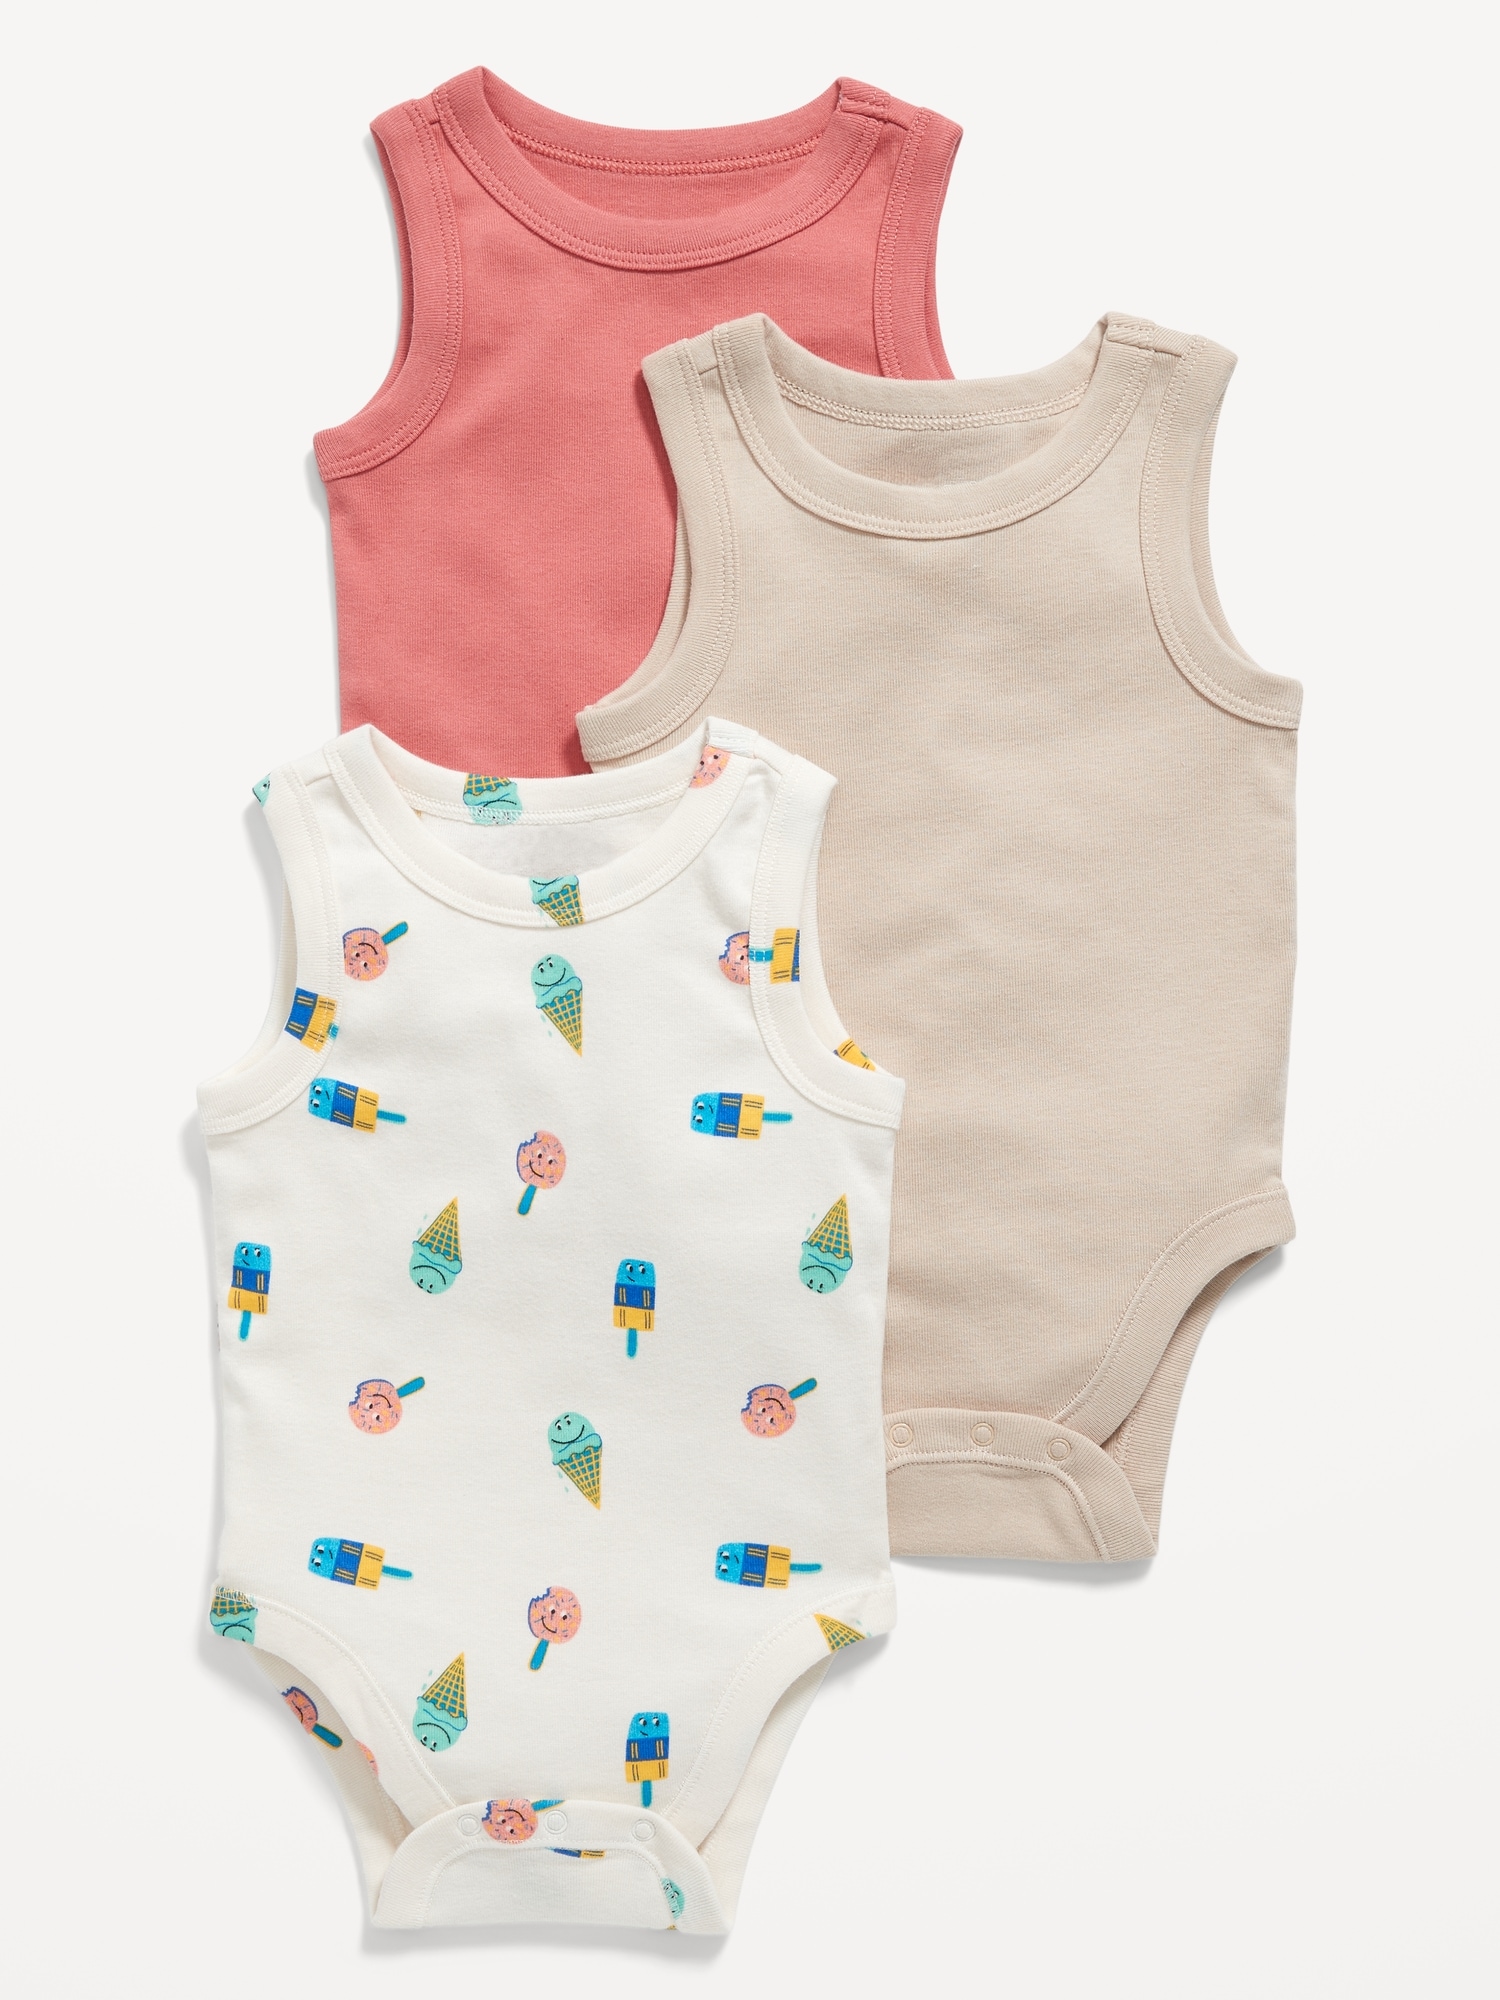 Buy Infant Muscle Shirt online